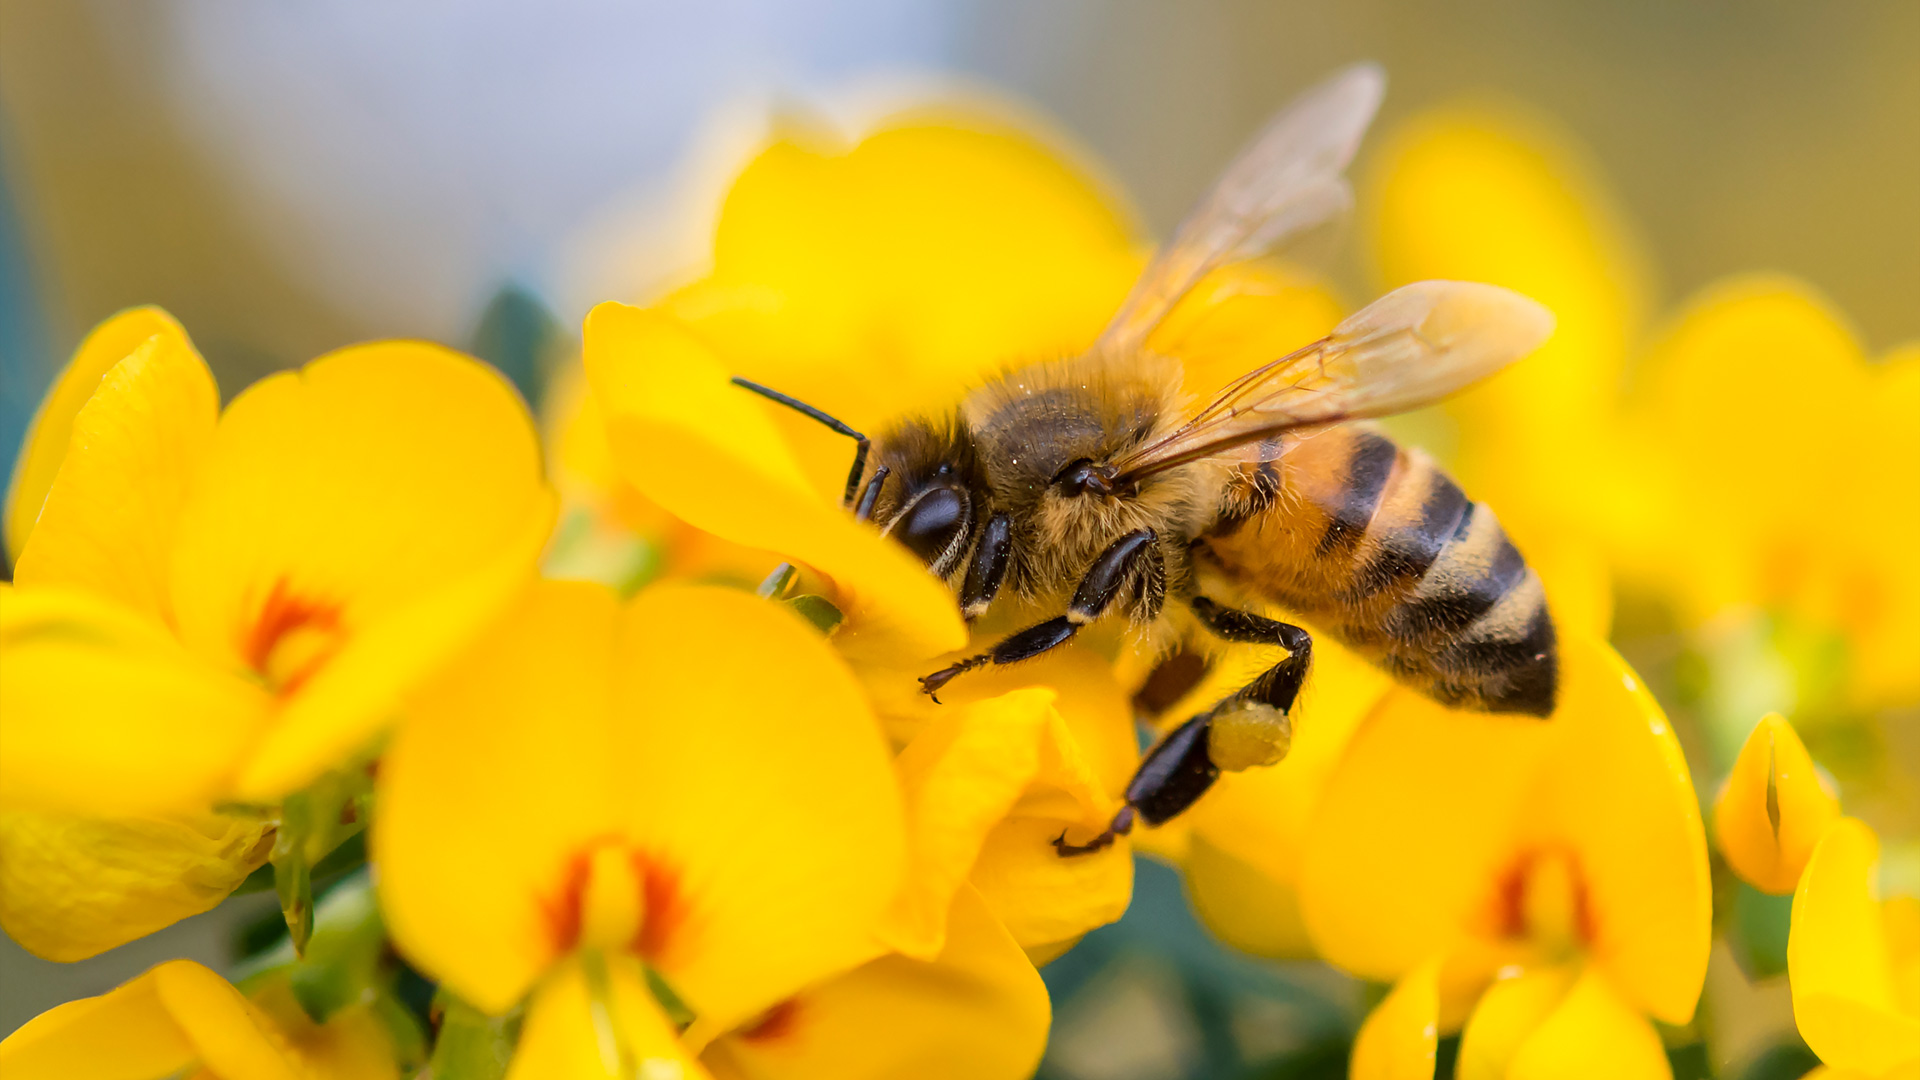 research-electromagnetic-fields-disrupt-bees-pollination-zero5g